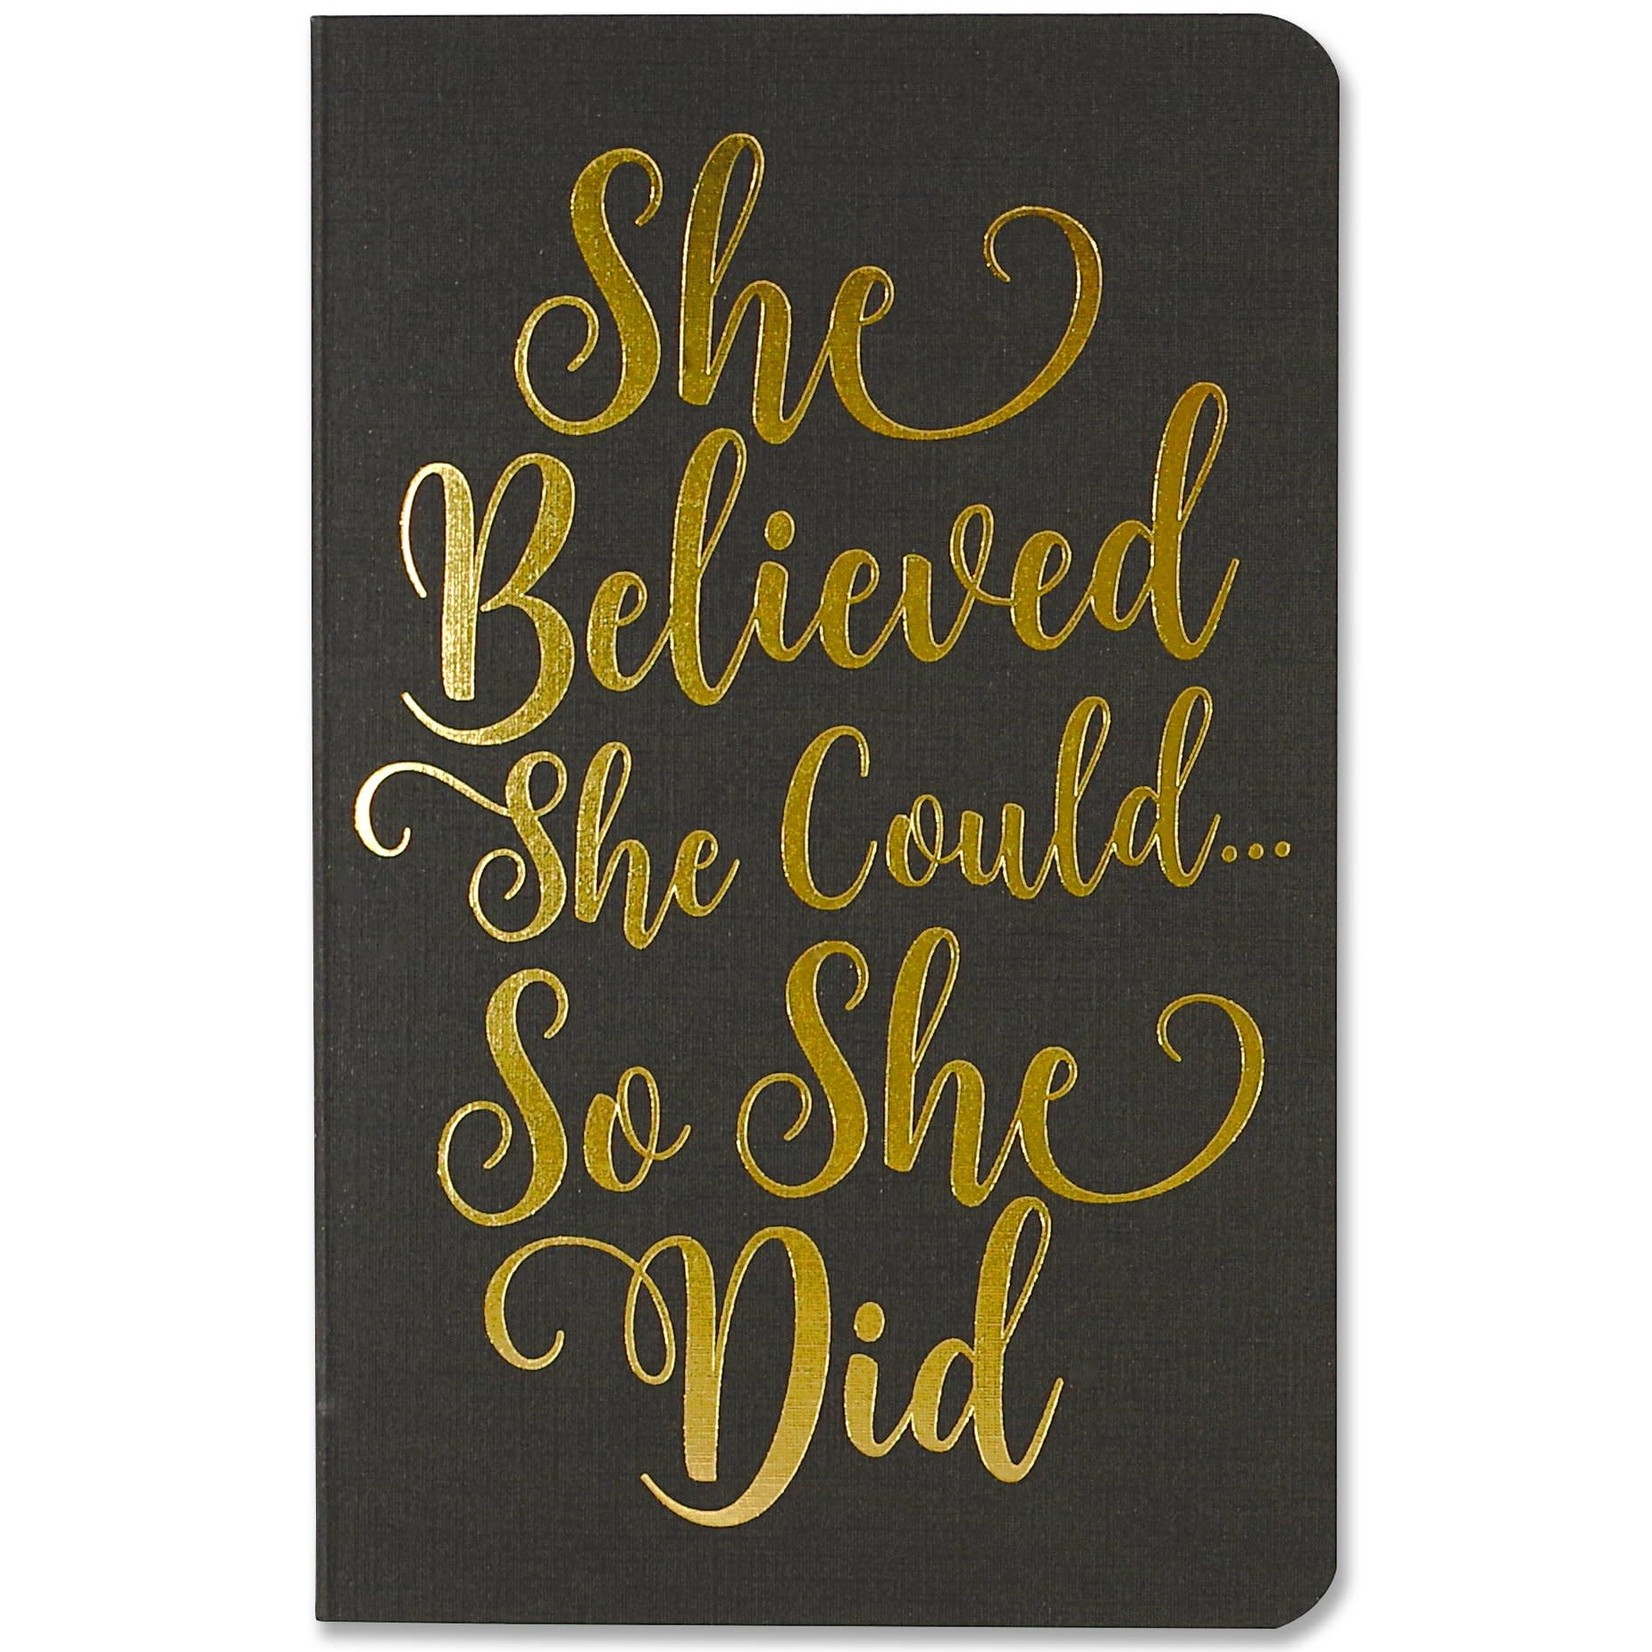 Peter Pauper Press Jotter Notebooks: She Believed She Could (3-pack) (Dot Grid Pattern))